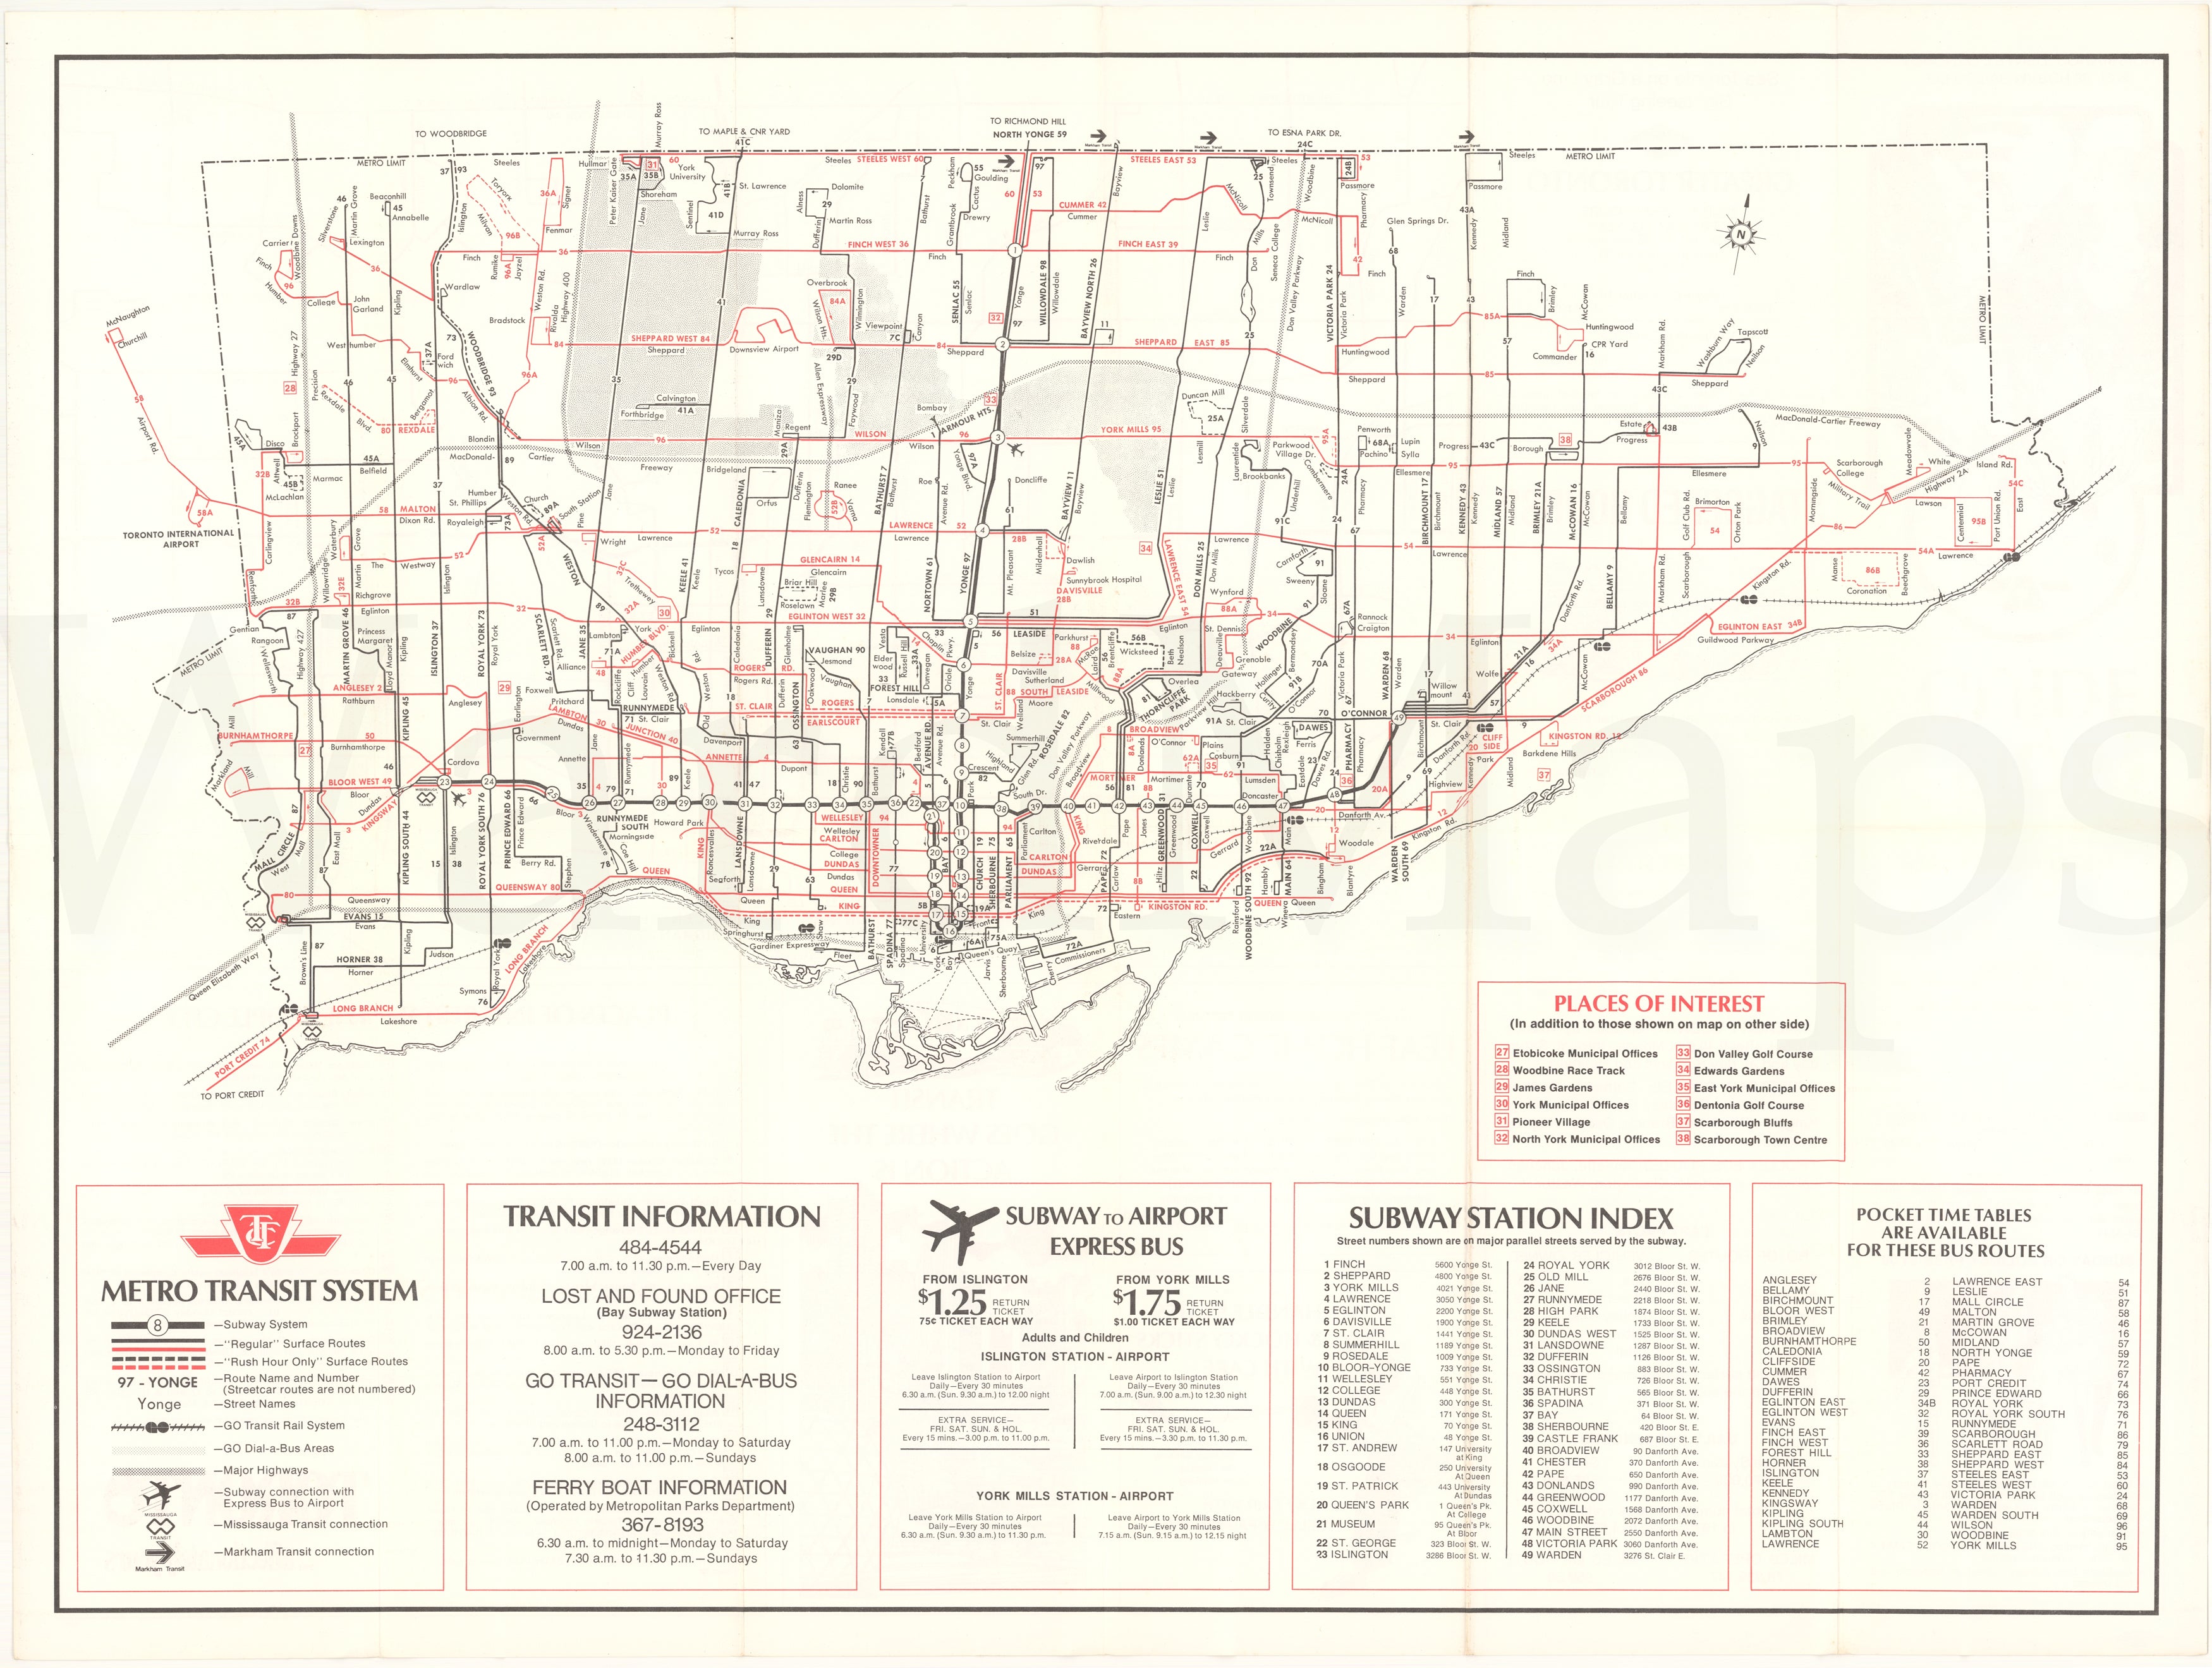 Toronto Transit Commission System Map 1974 March 30